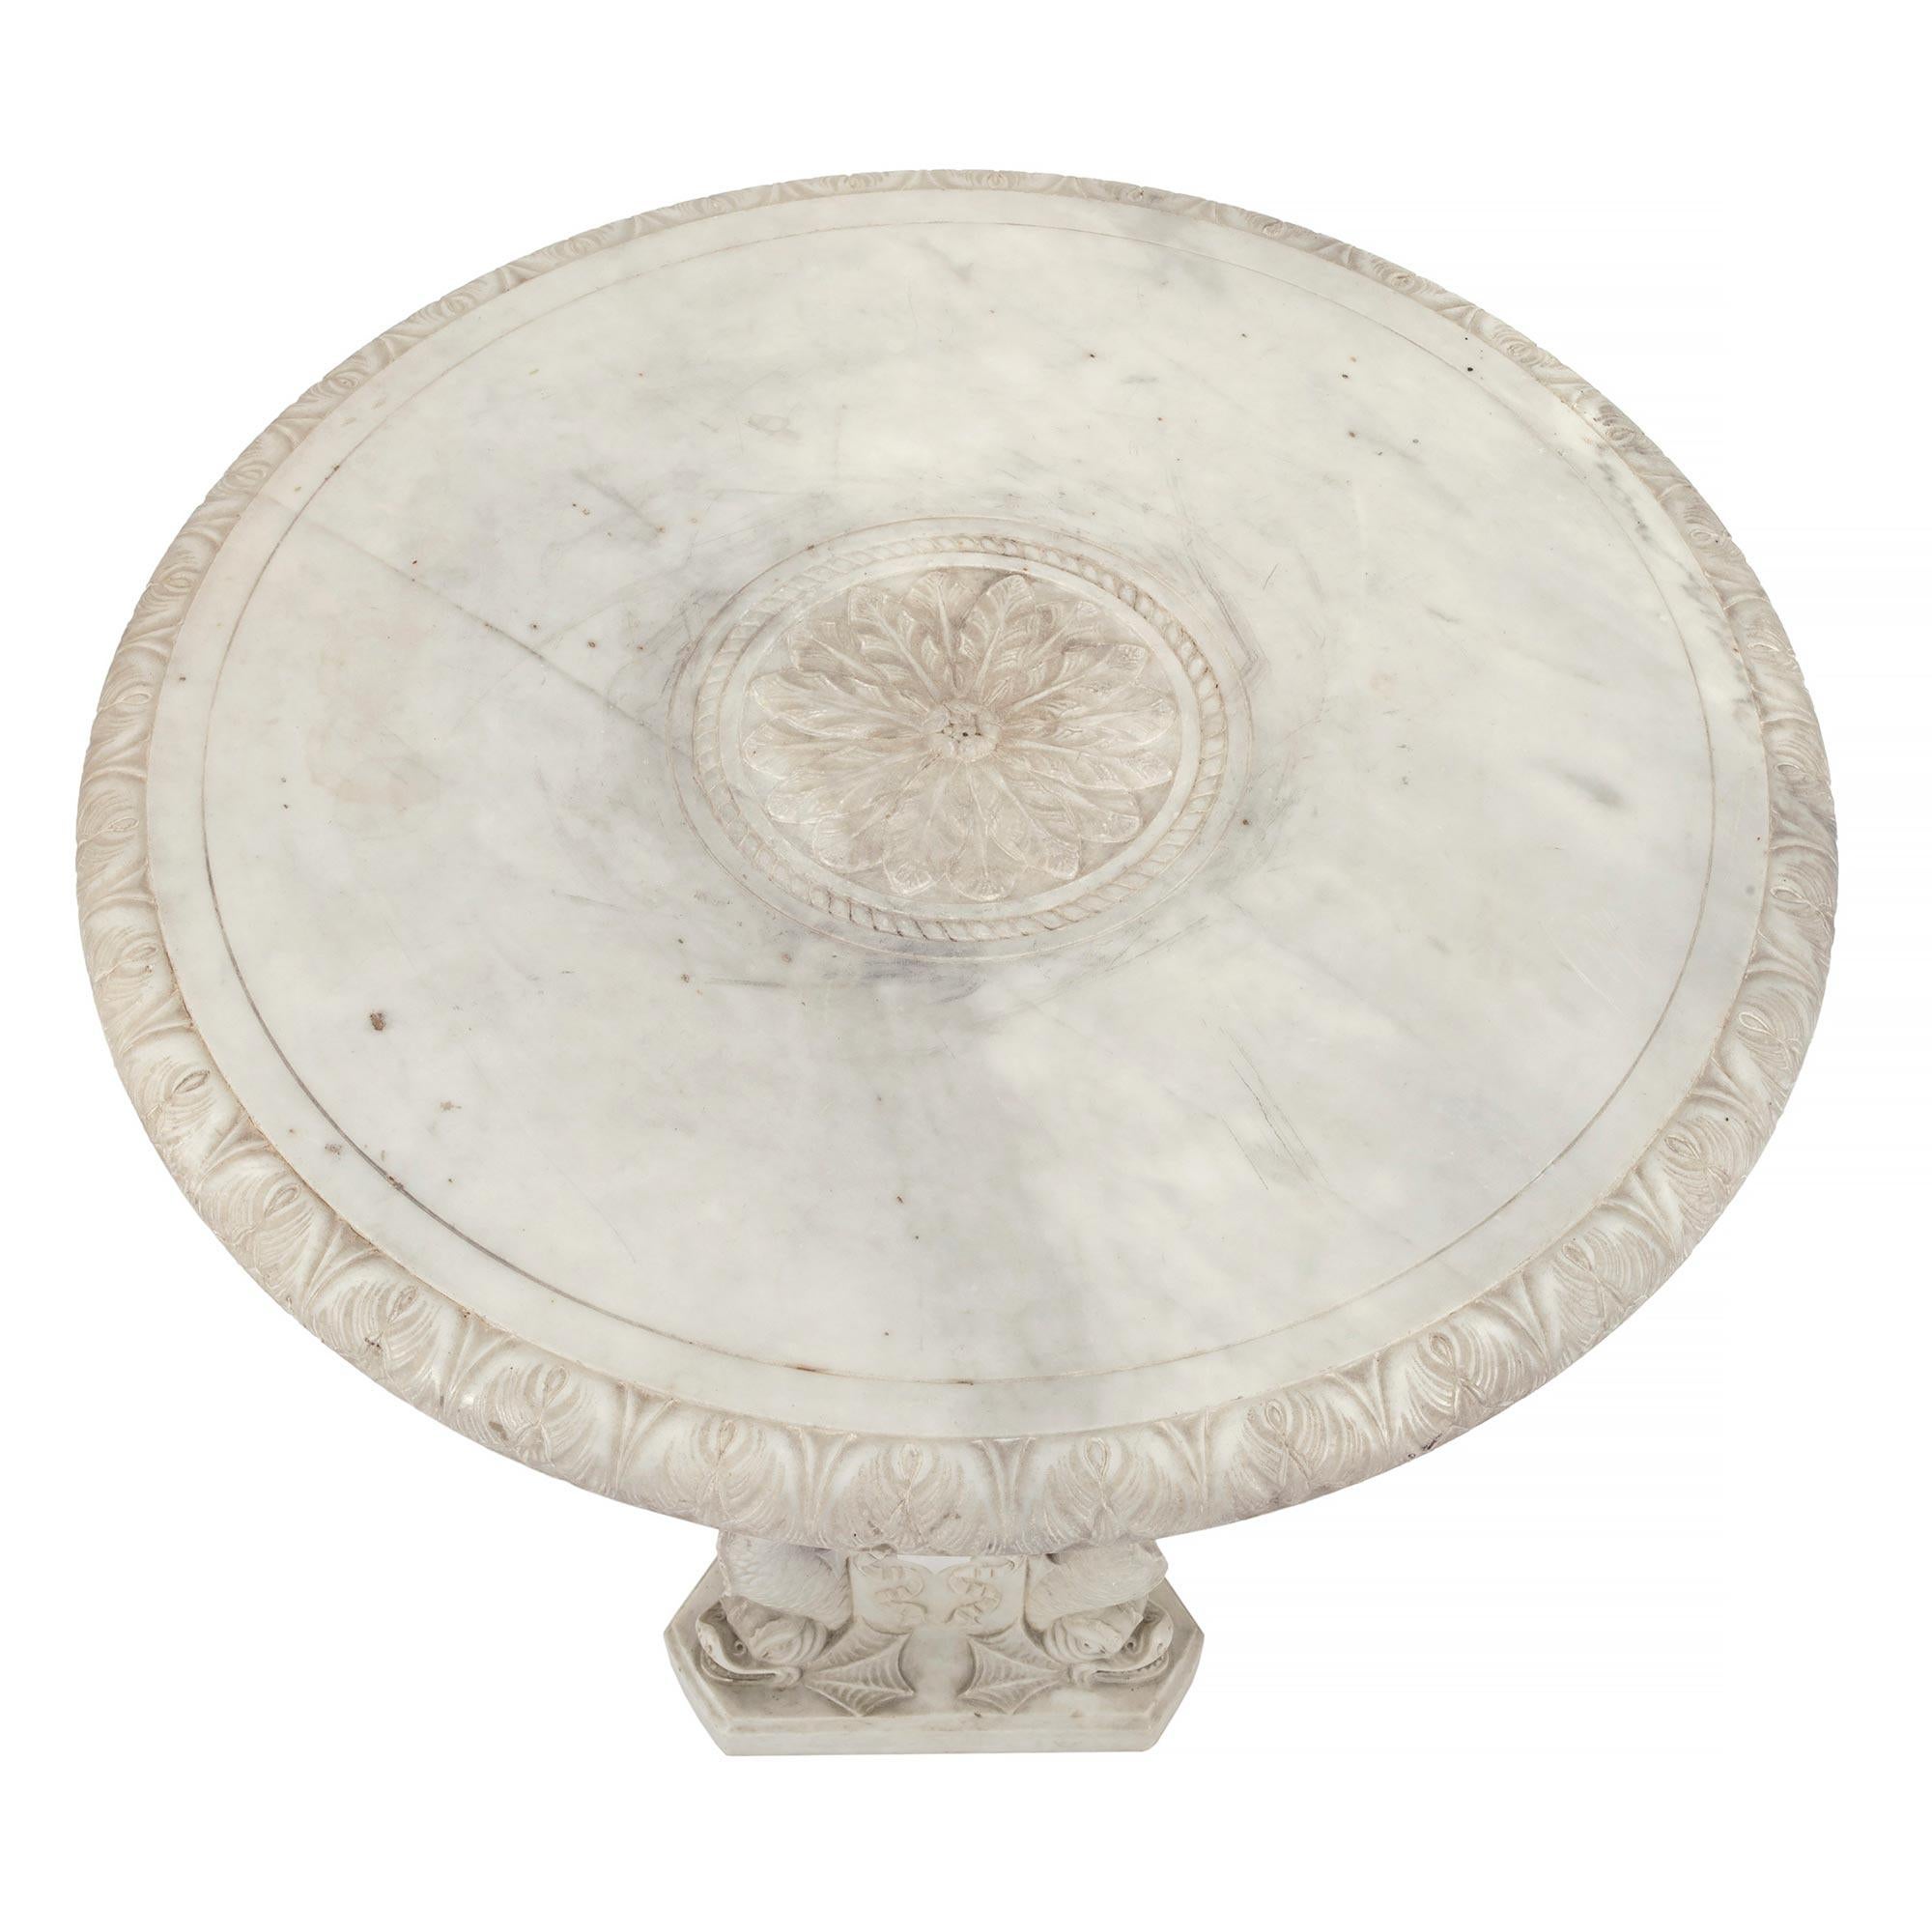 A fine Italian 19th century Louis XVI st. solid white carrara marble side table. The table is raised by a most decorative triangular base with cut corners and three most impressive and richly sculpted dolphins. The baluster shaped central support